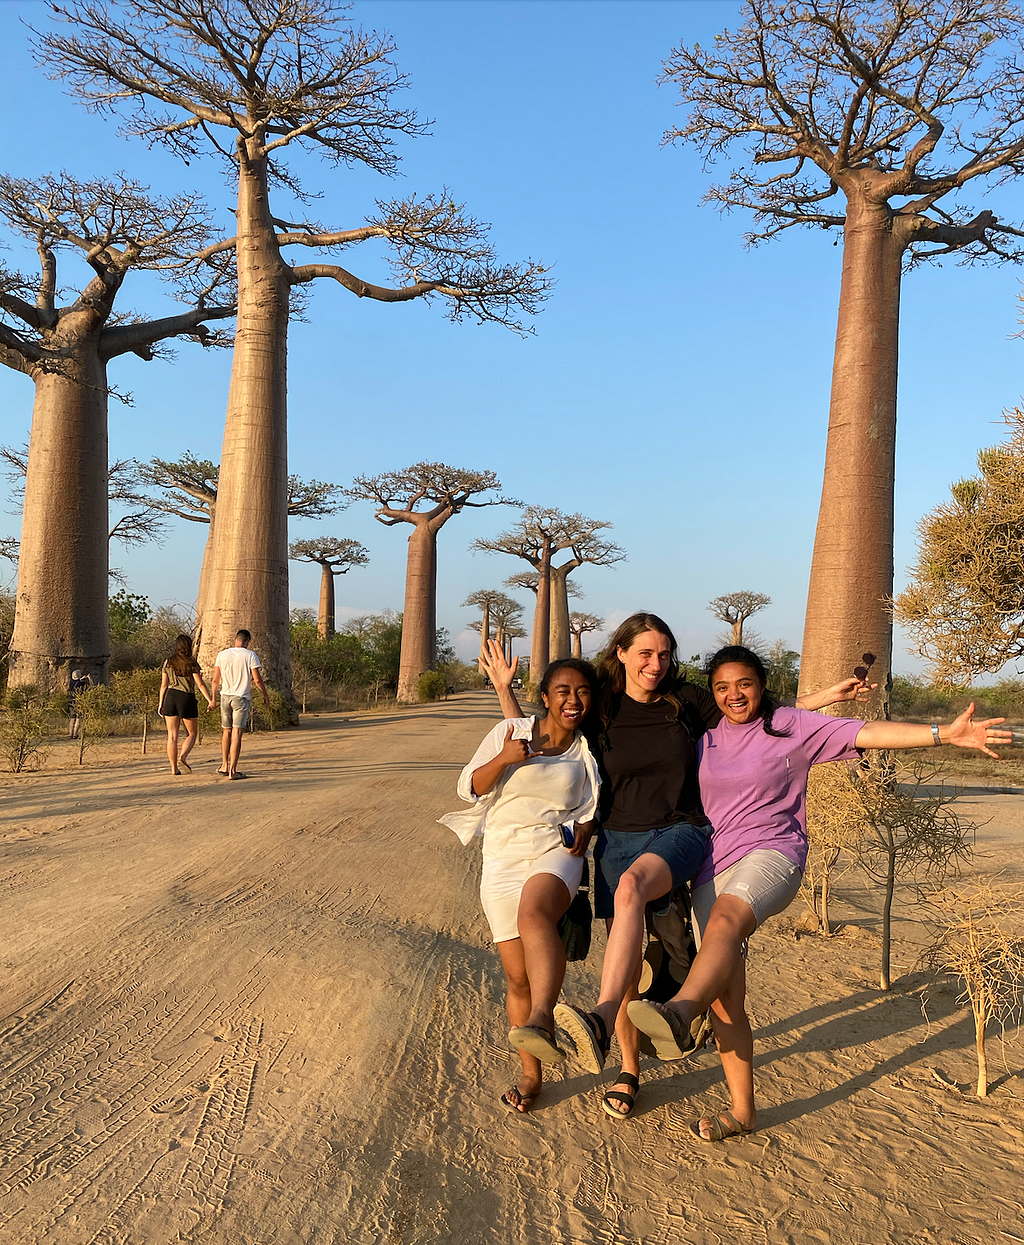 Stephie (left) enjoying a rest stop on the Avenue of the Baobabs with Sarah and Rota on the way back to Antananarivo from the west coast of Madagascar.